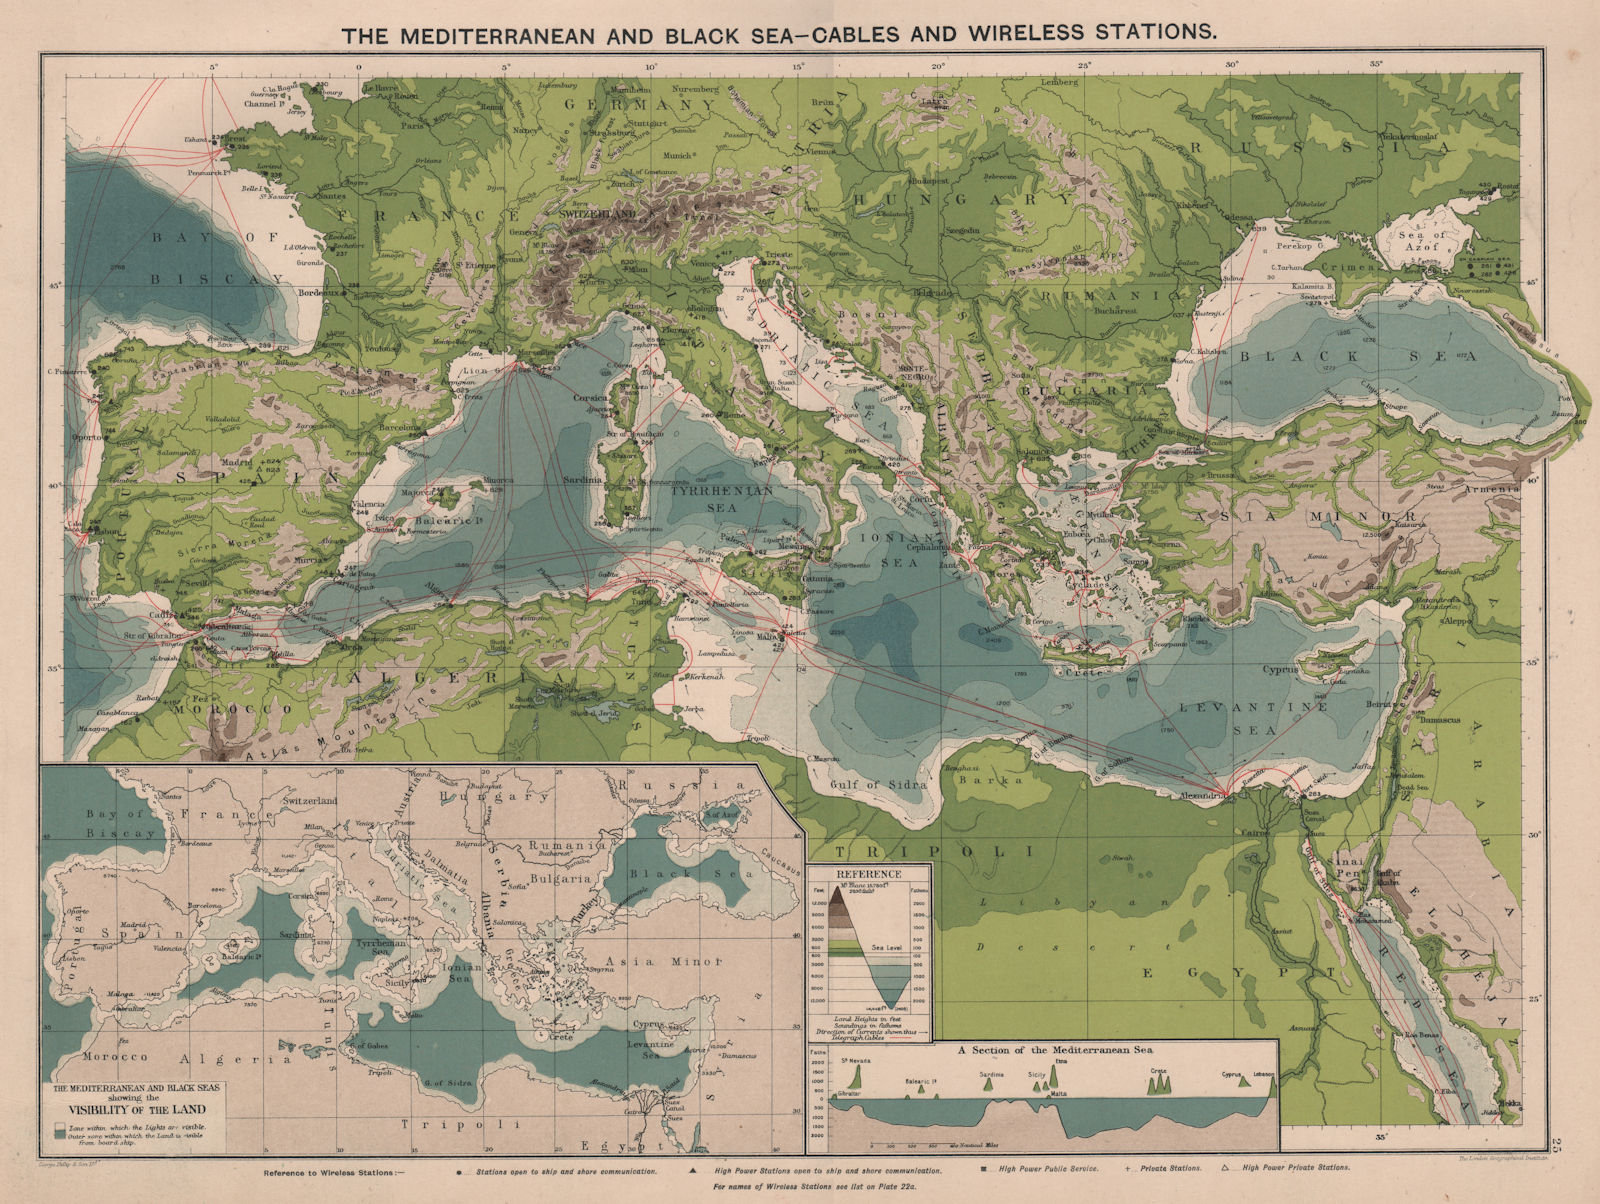 Mediterranean & Black Sea. Cables & Wireless Stations. Land visibility 1918 map